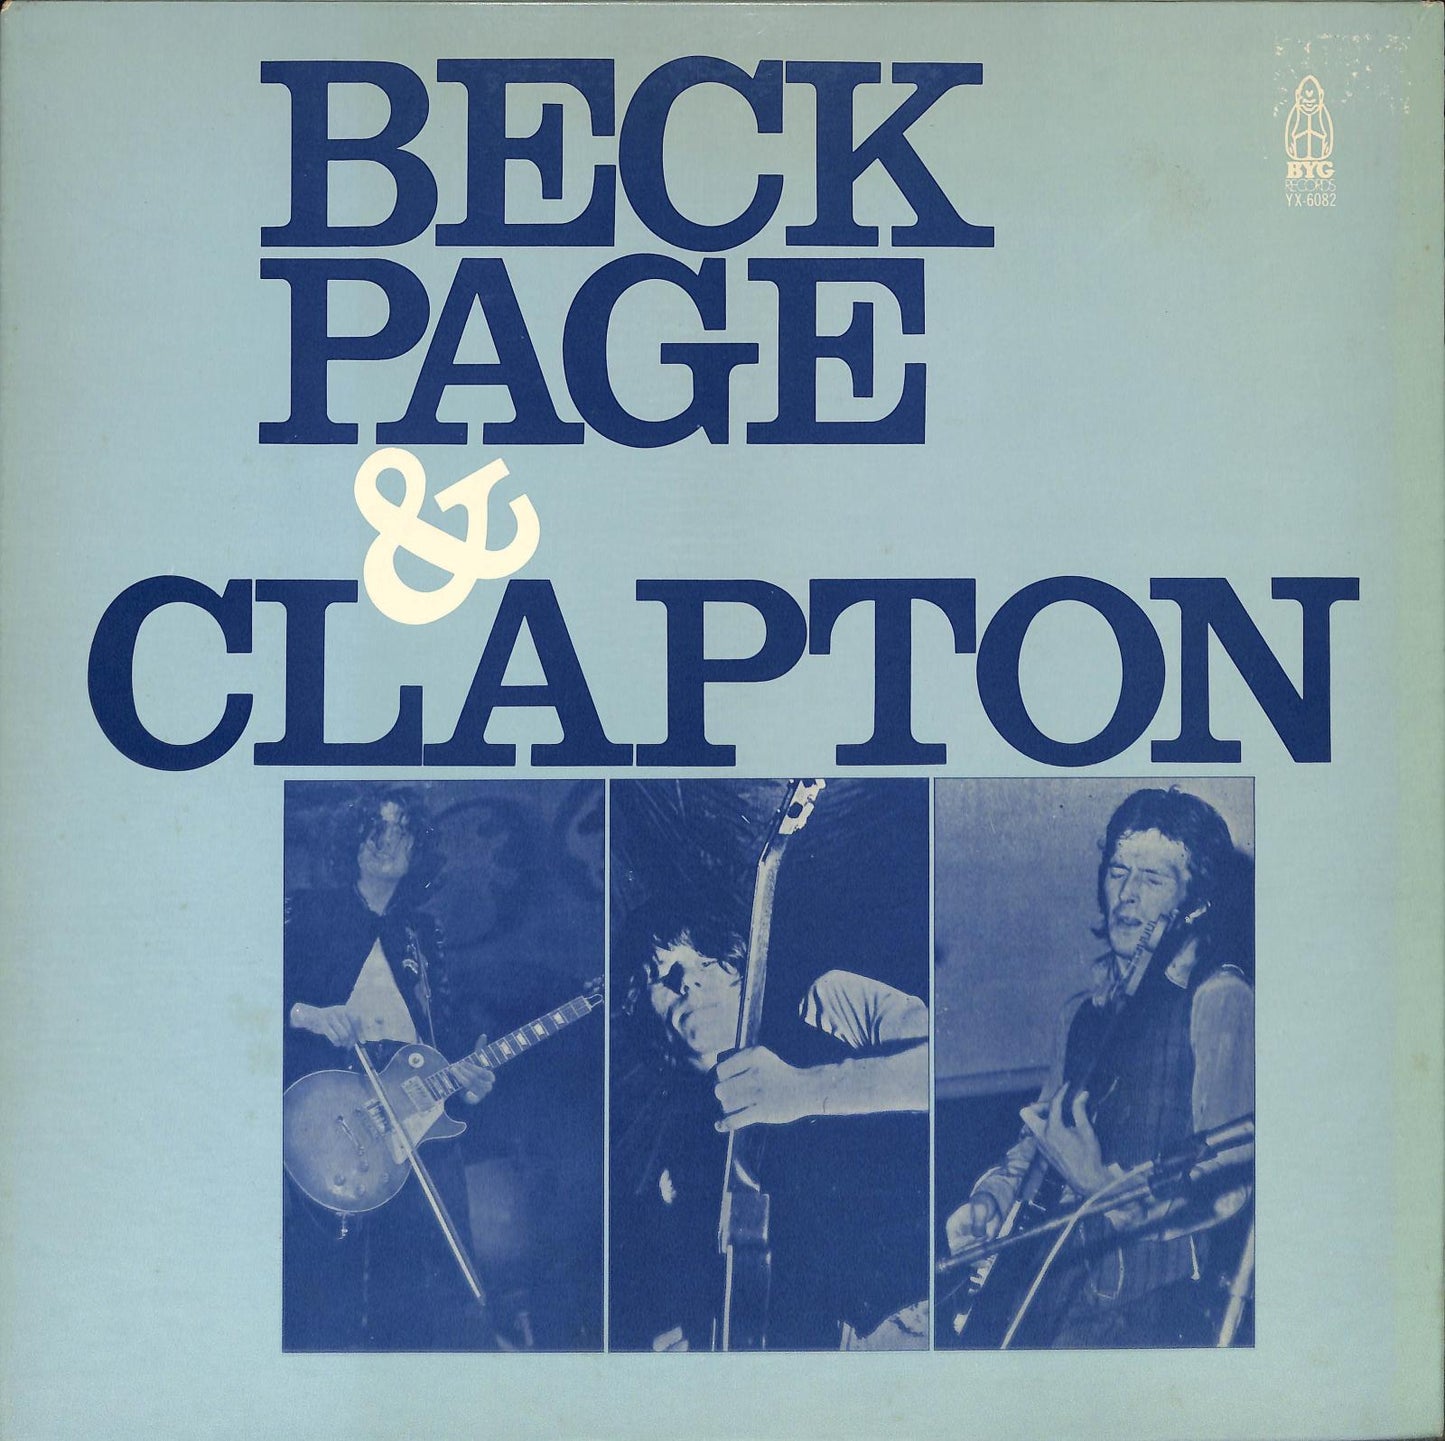 JEFF BECK, JIMMY PAGE, ERIC CLAPTON - Beck, Page & Clapton cover